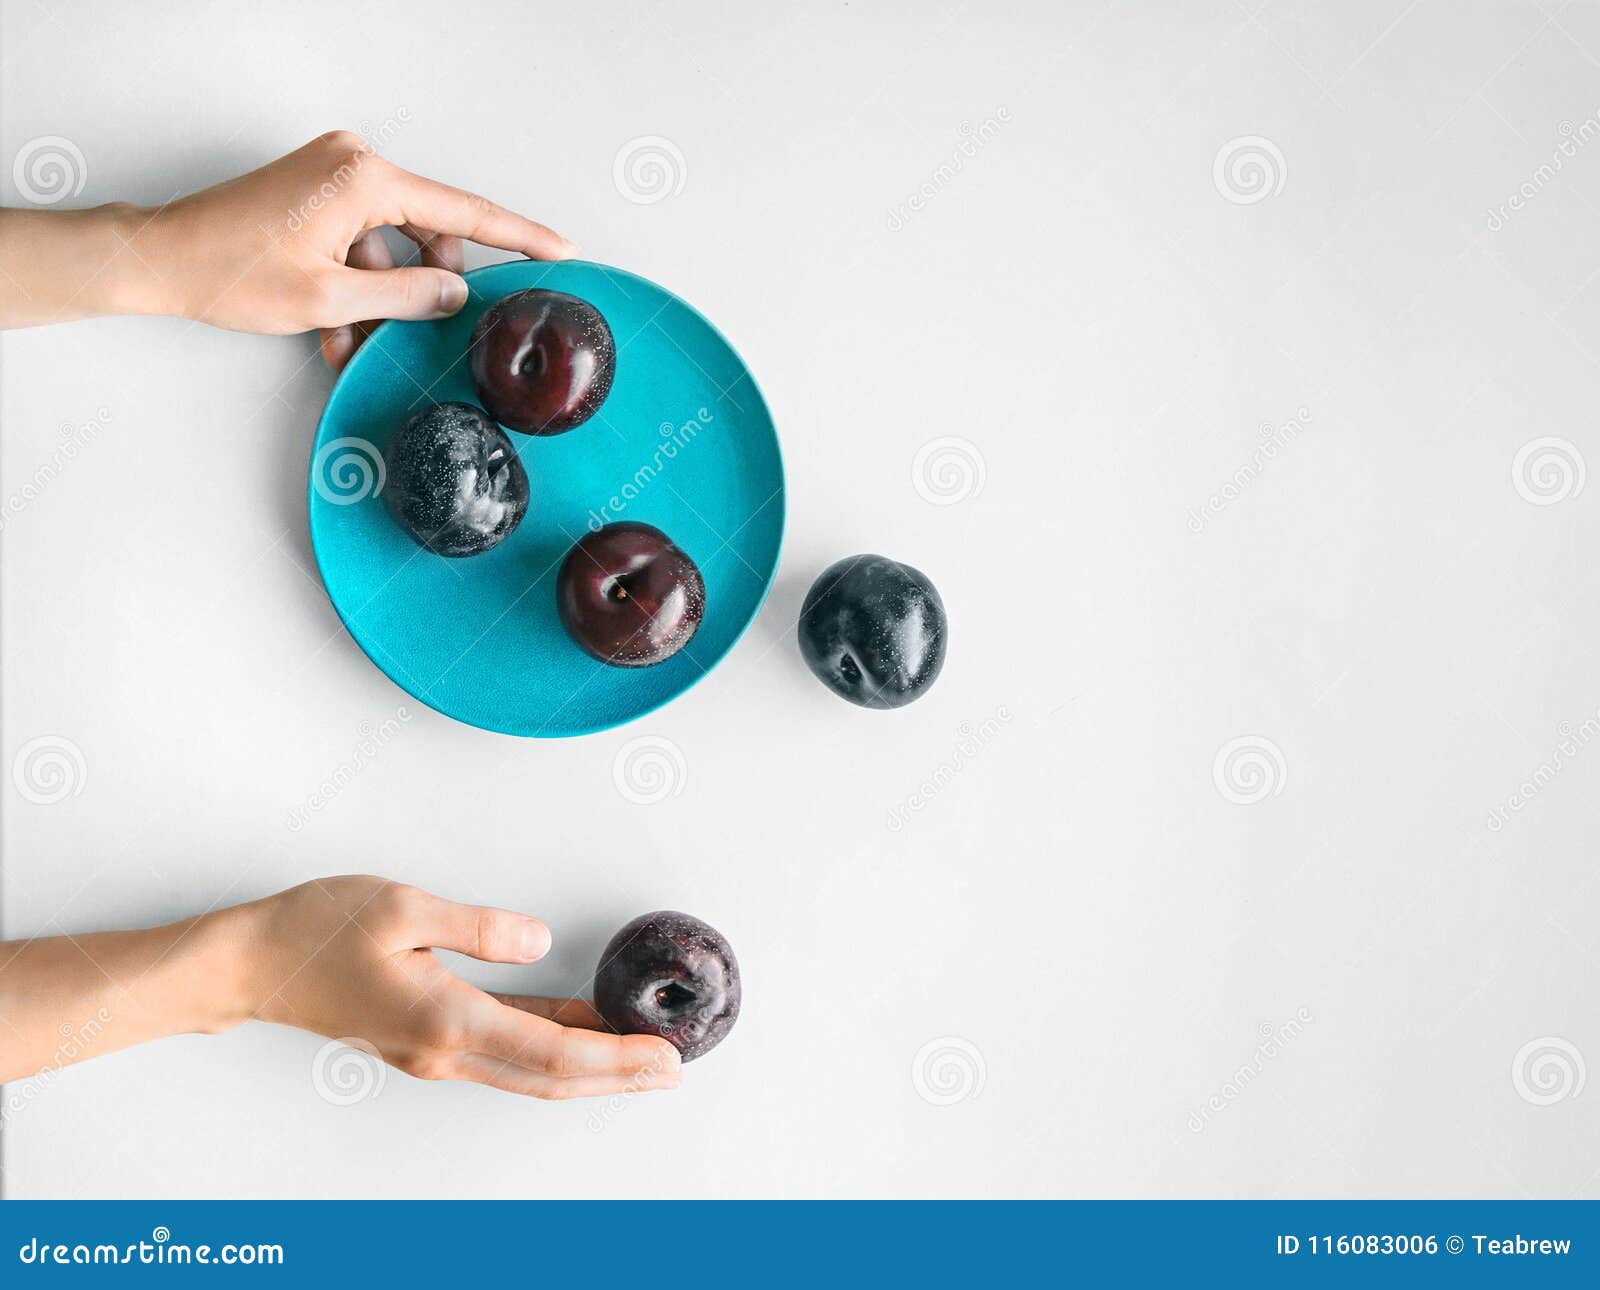 plate with plums